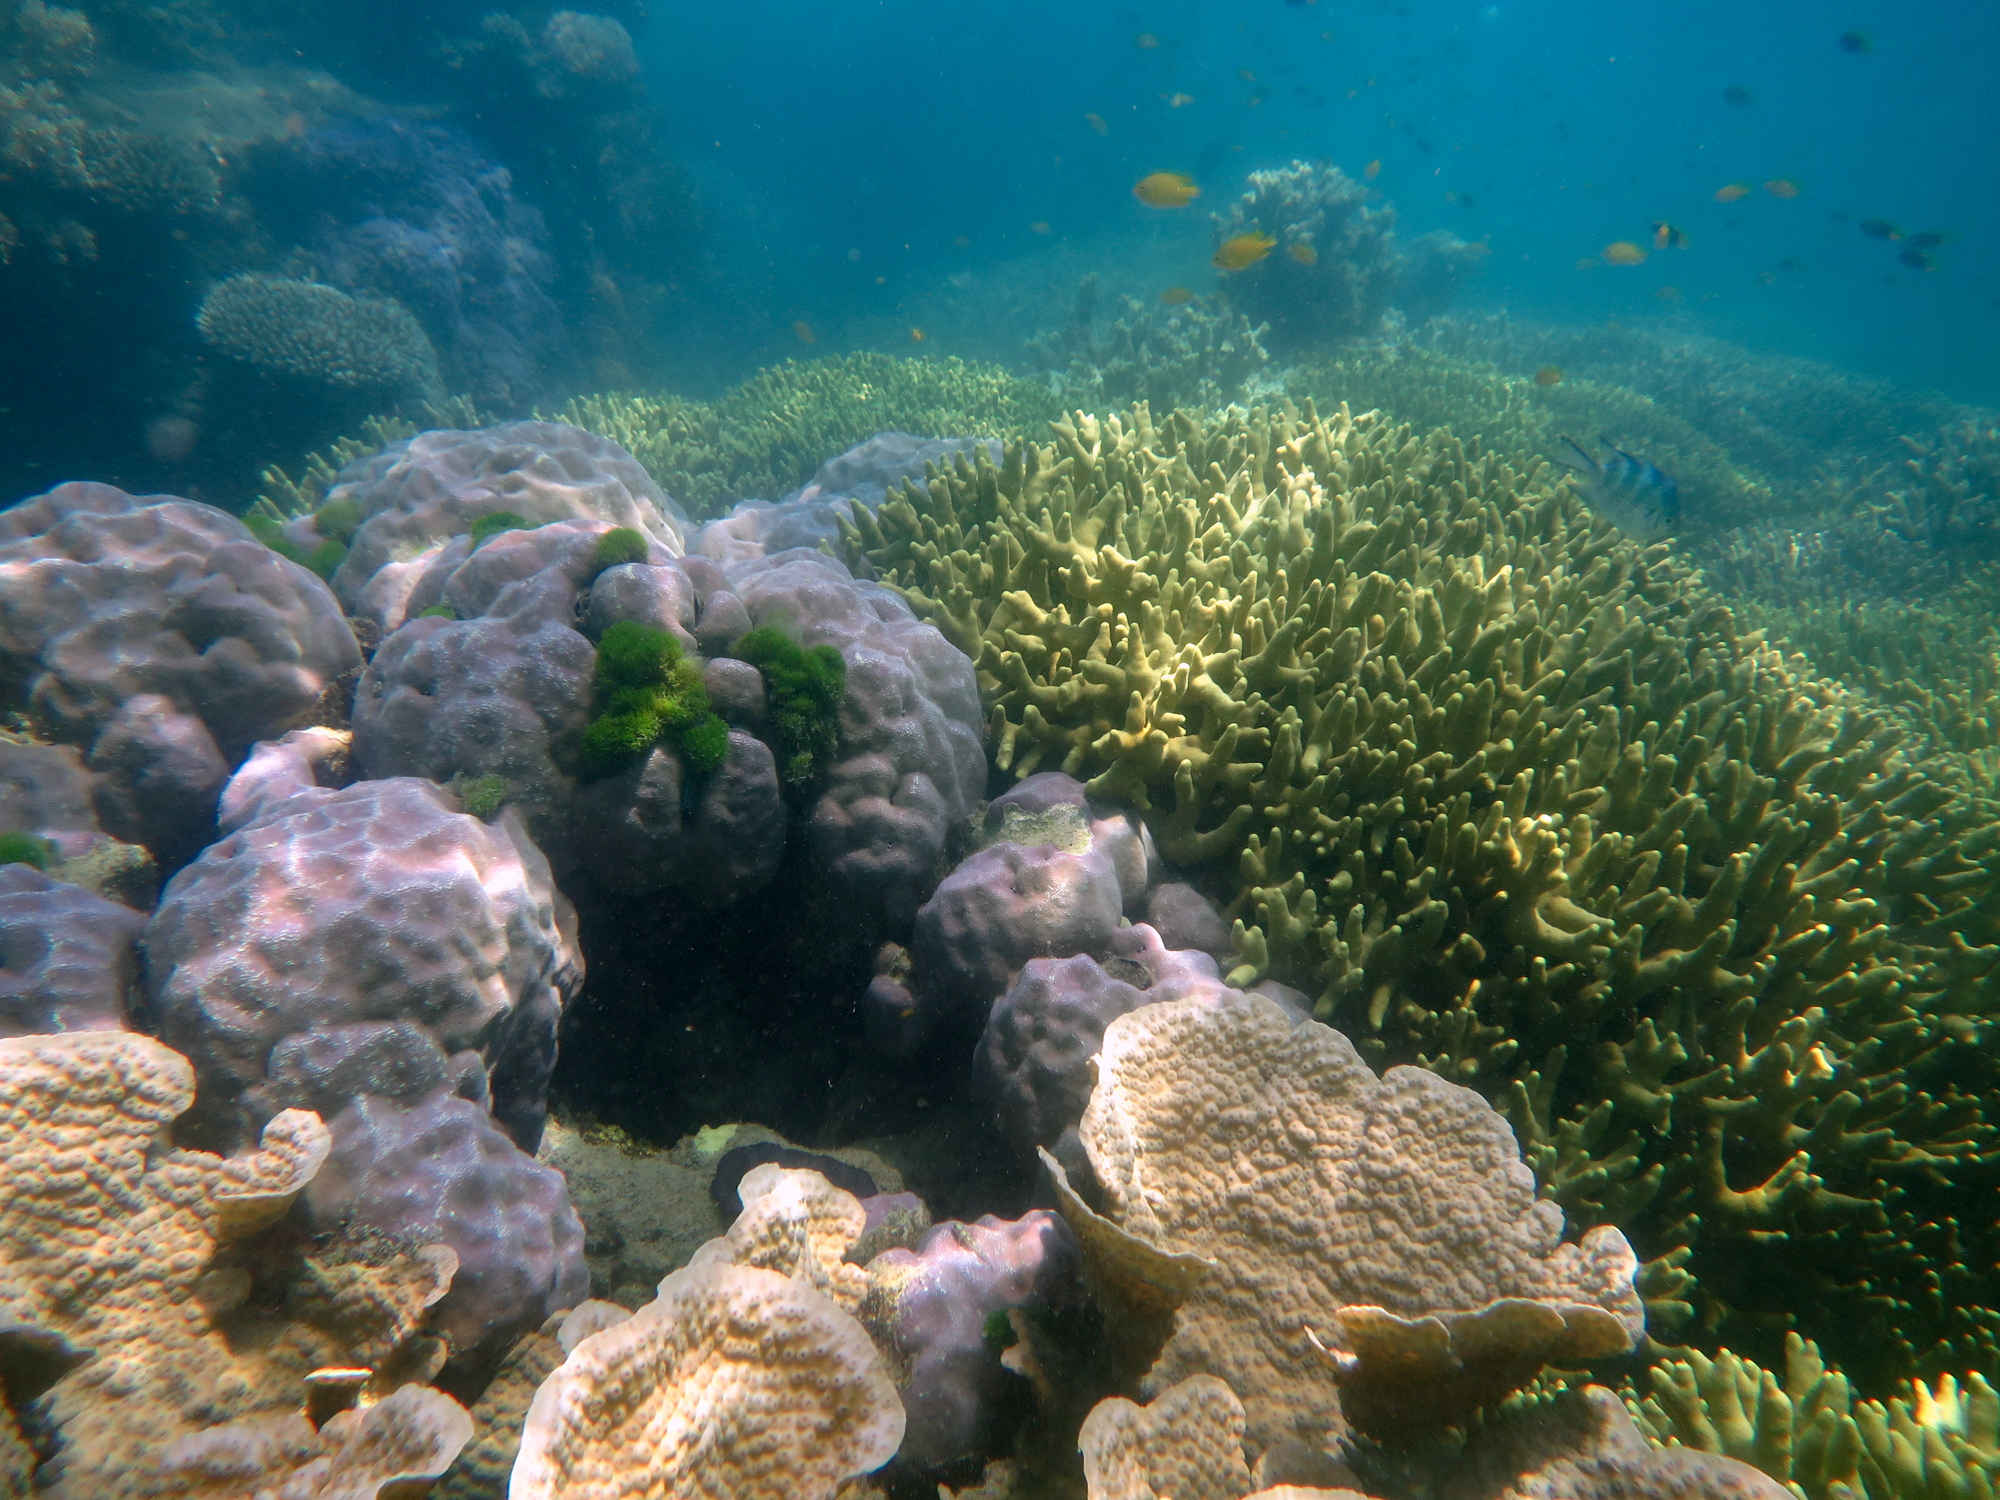 Coral communities close to shore, such as this near Palm Island on the central Great Barrier Reef, are at increased risk from ocean acidification